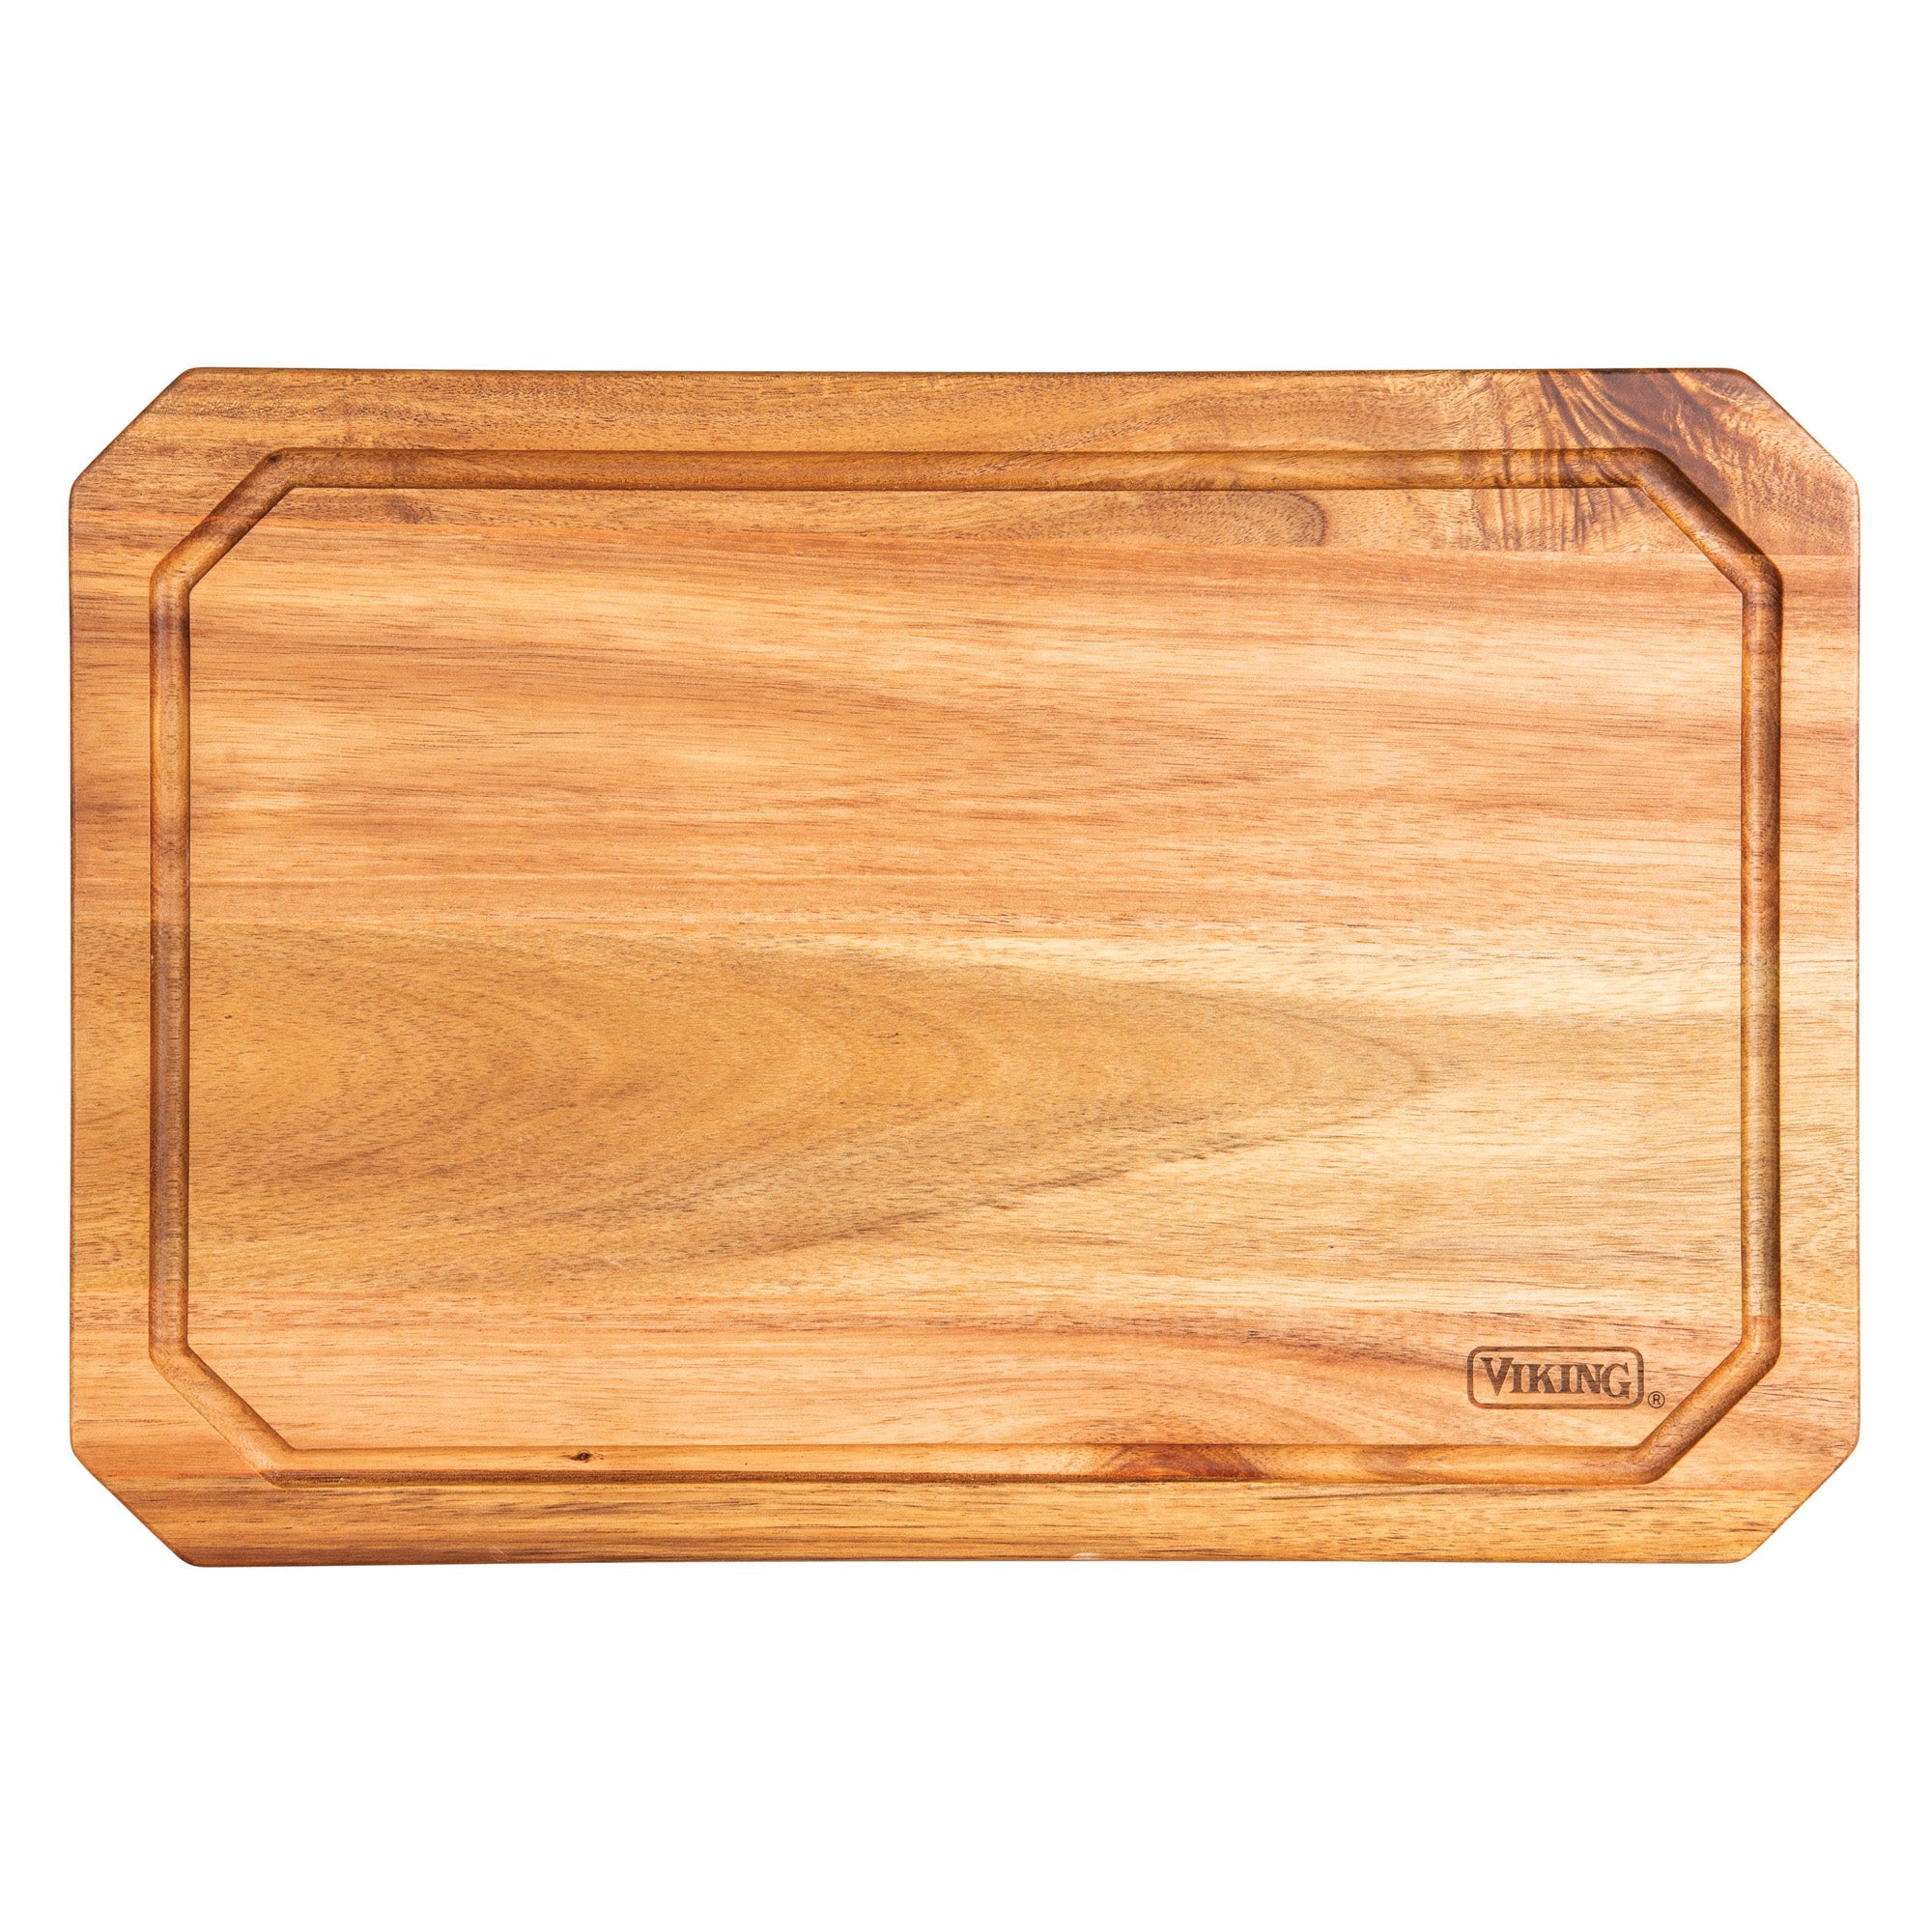 Large Wood Cutting Board With Juice Groove 18x12 Inches, Wood Cheese Board,  Wooden Chopping Board, Wooden Cutting Board Made in the USA 